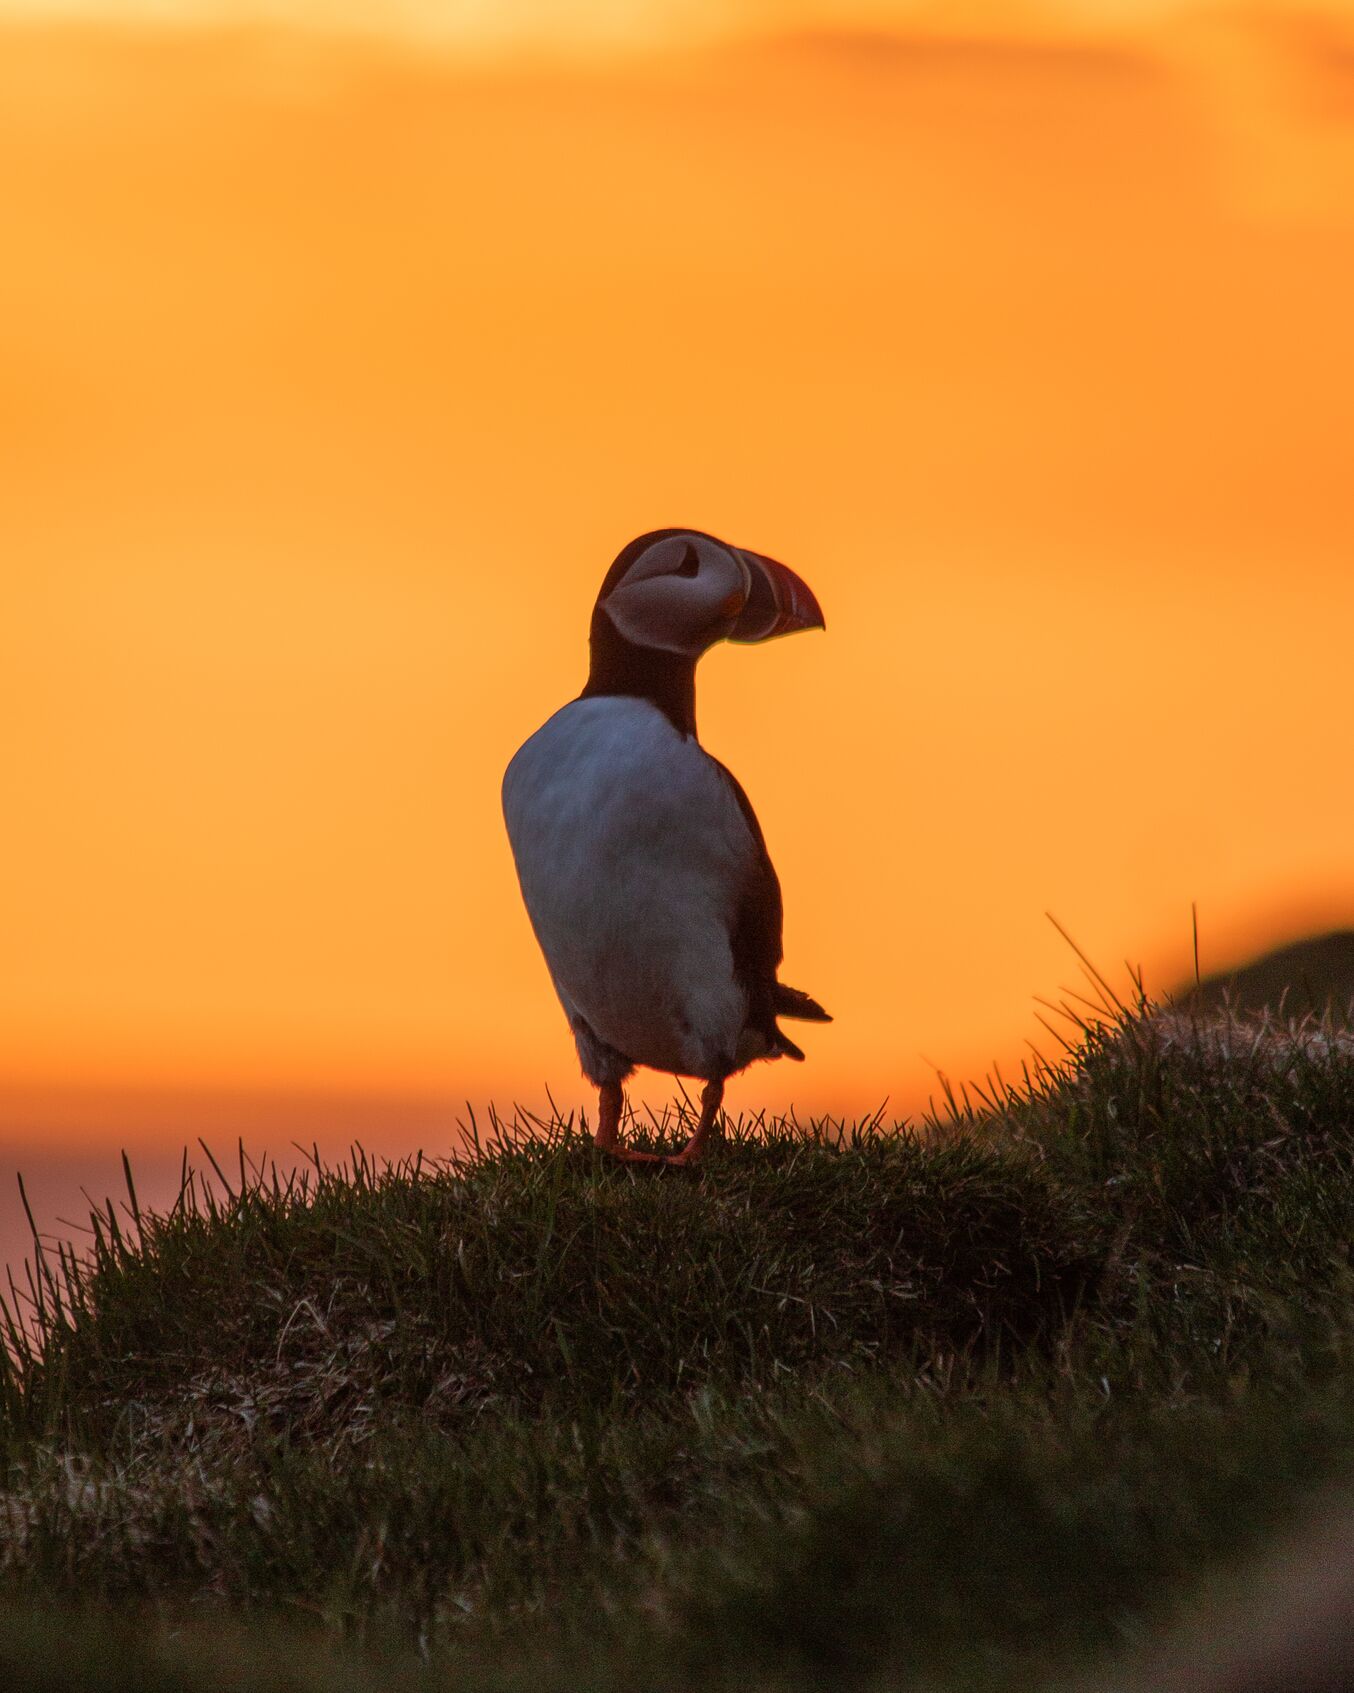 A puffin stands on land with a backdrop of orange sky at sunset